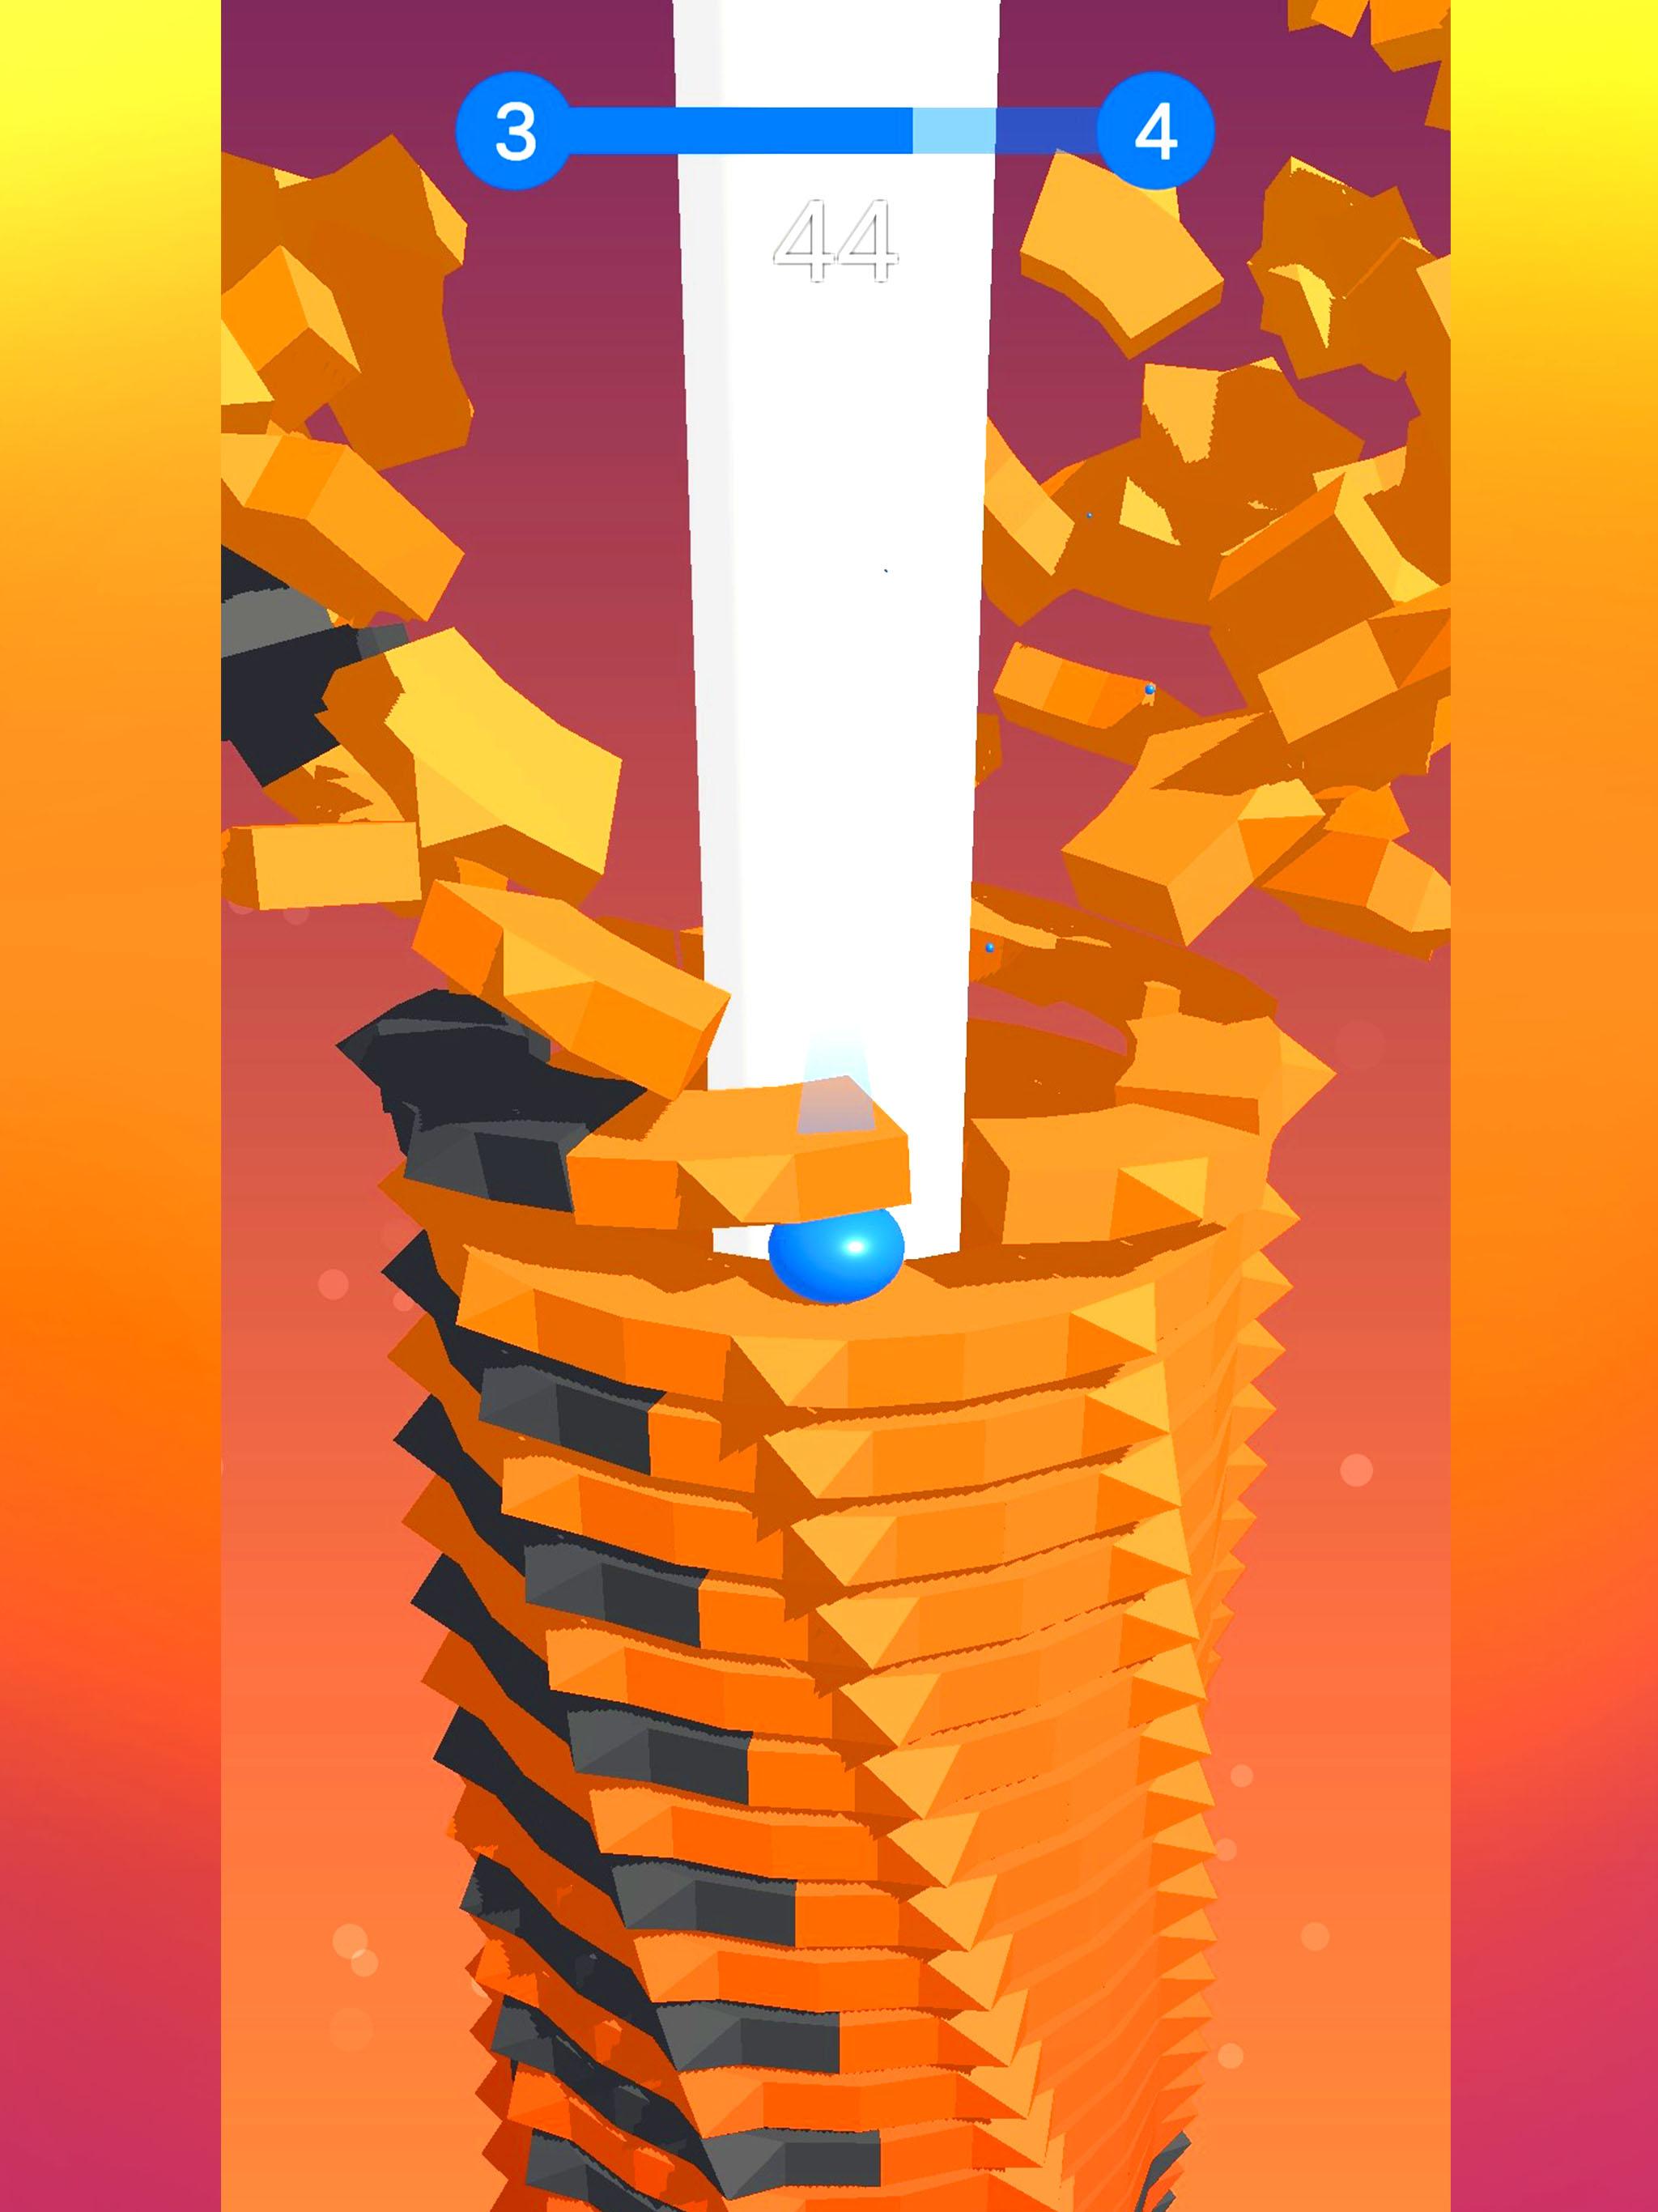 Stack Ball for Android - APK Download - 